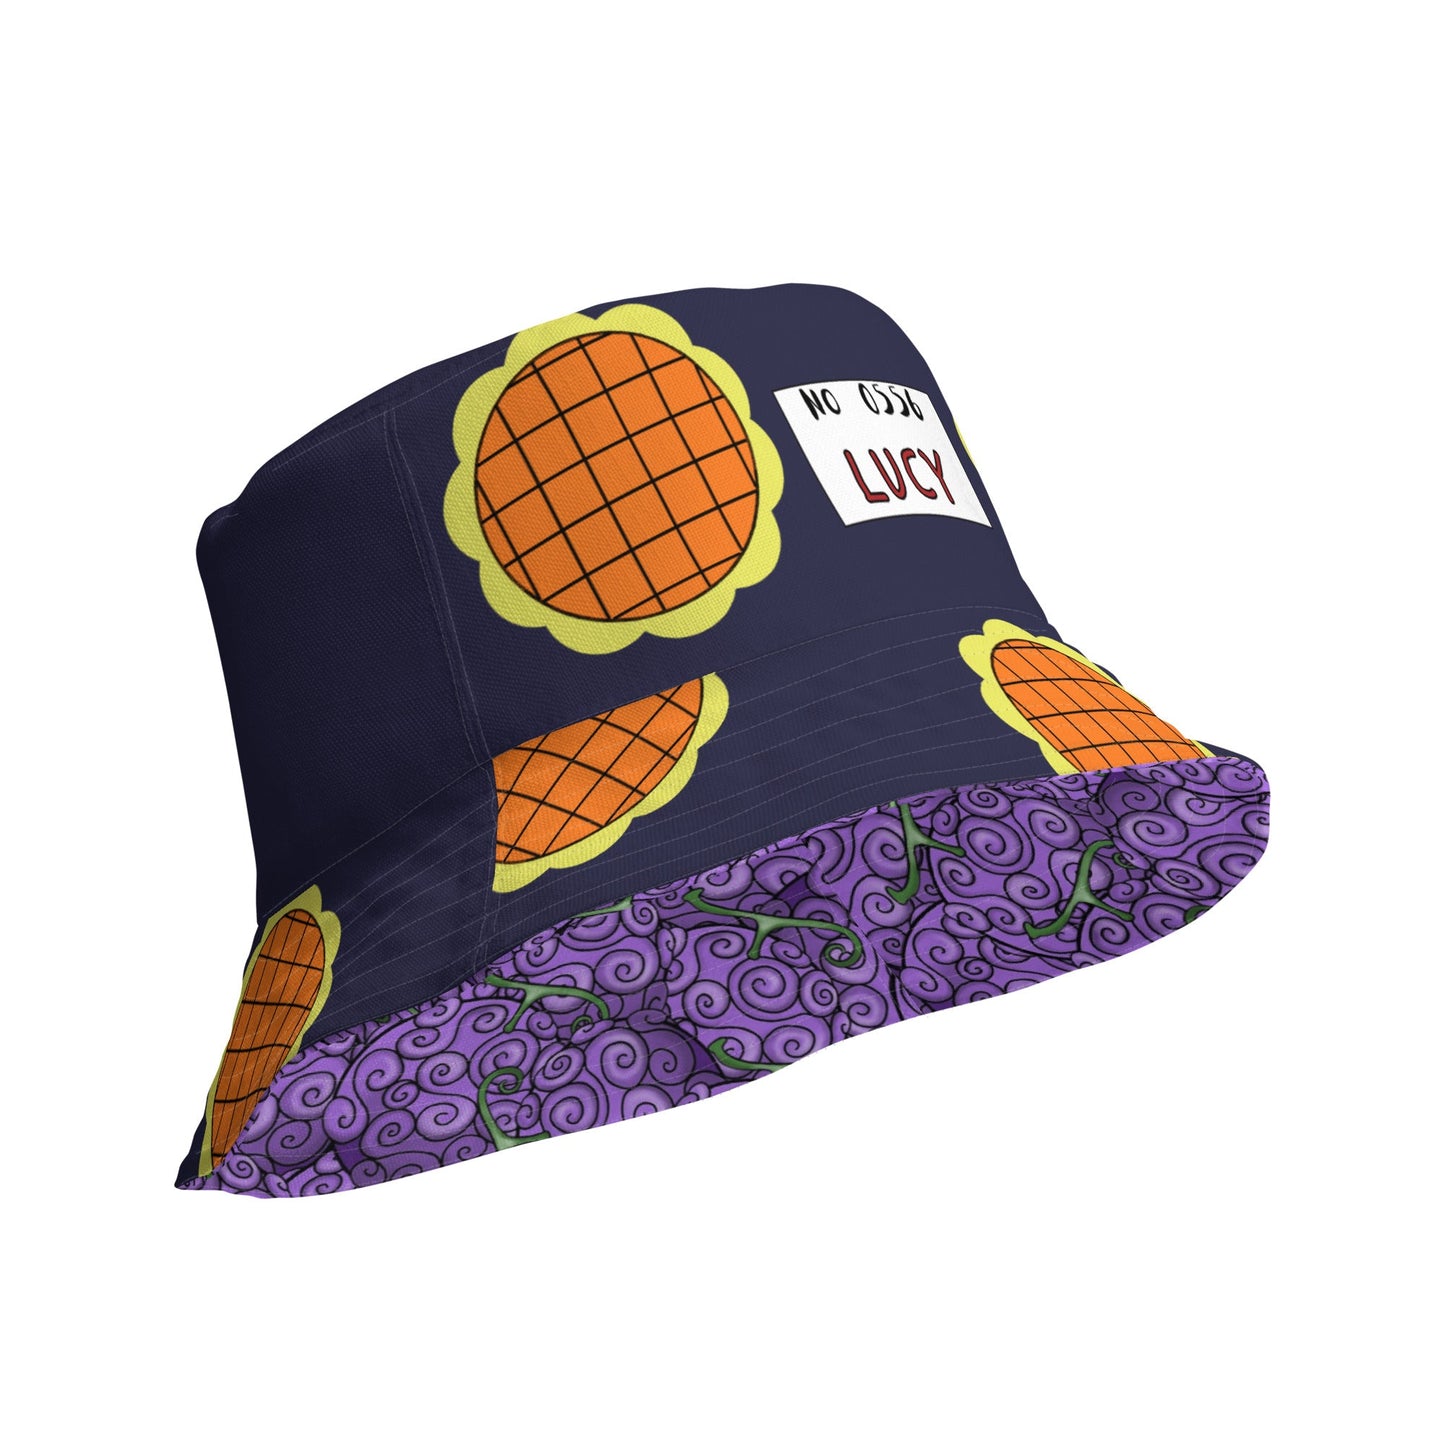 Reversible Lucy Luffy Bucket Hat